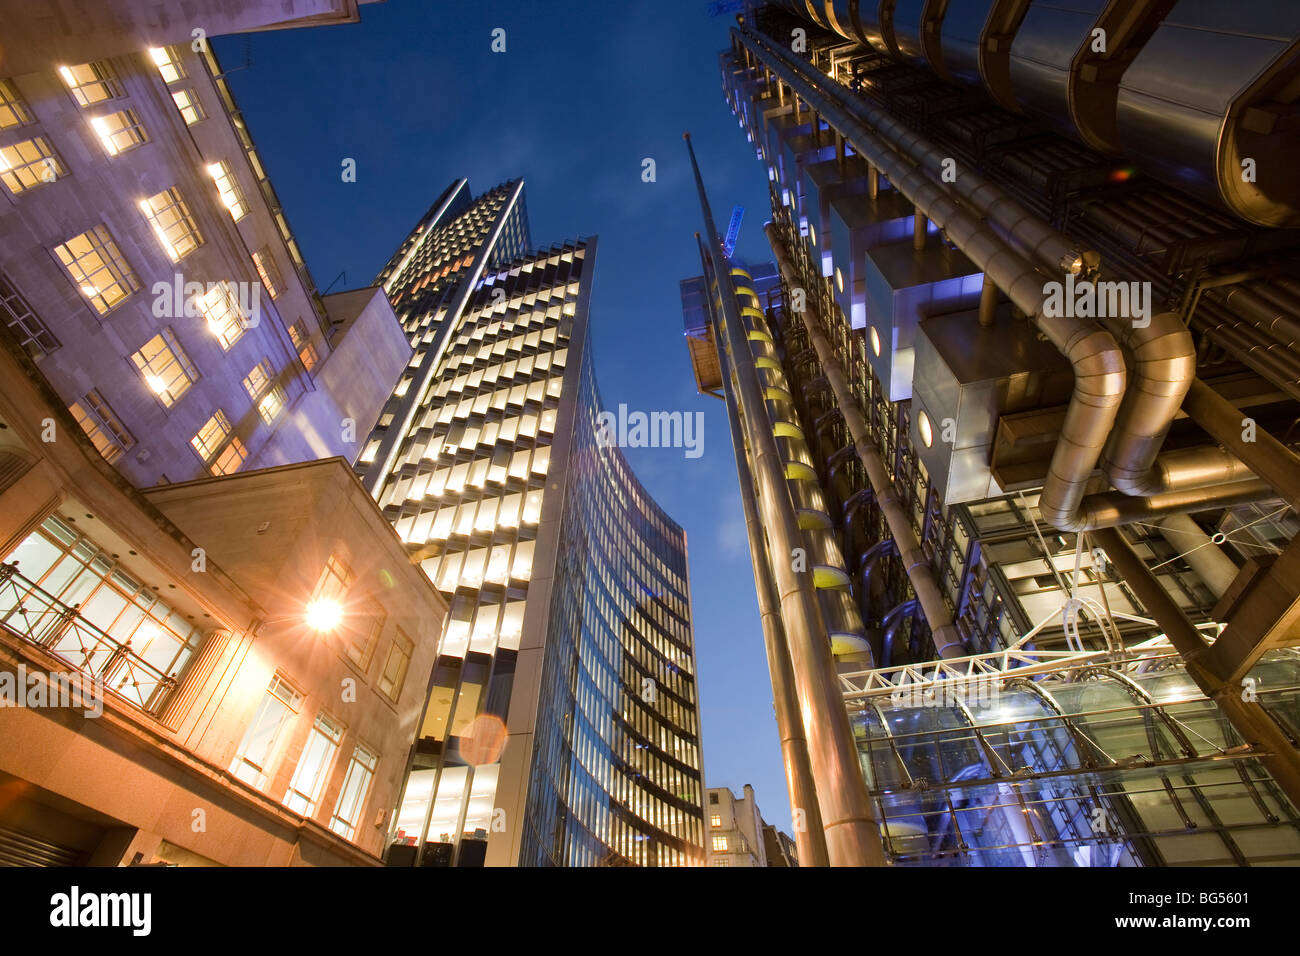 The Lloyds insurance building in the City of London, UK. Stock Photo